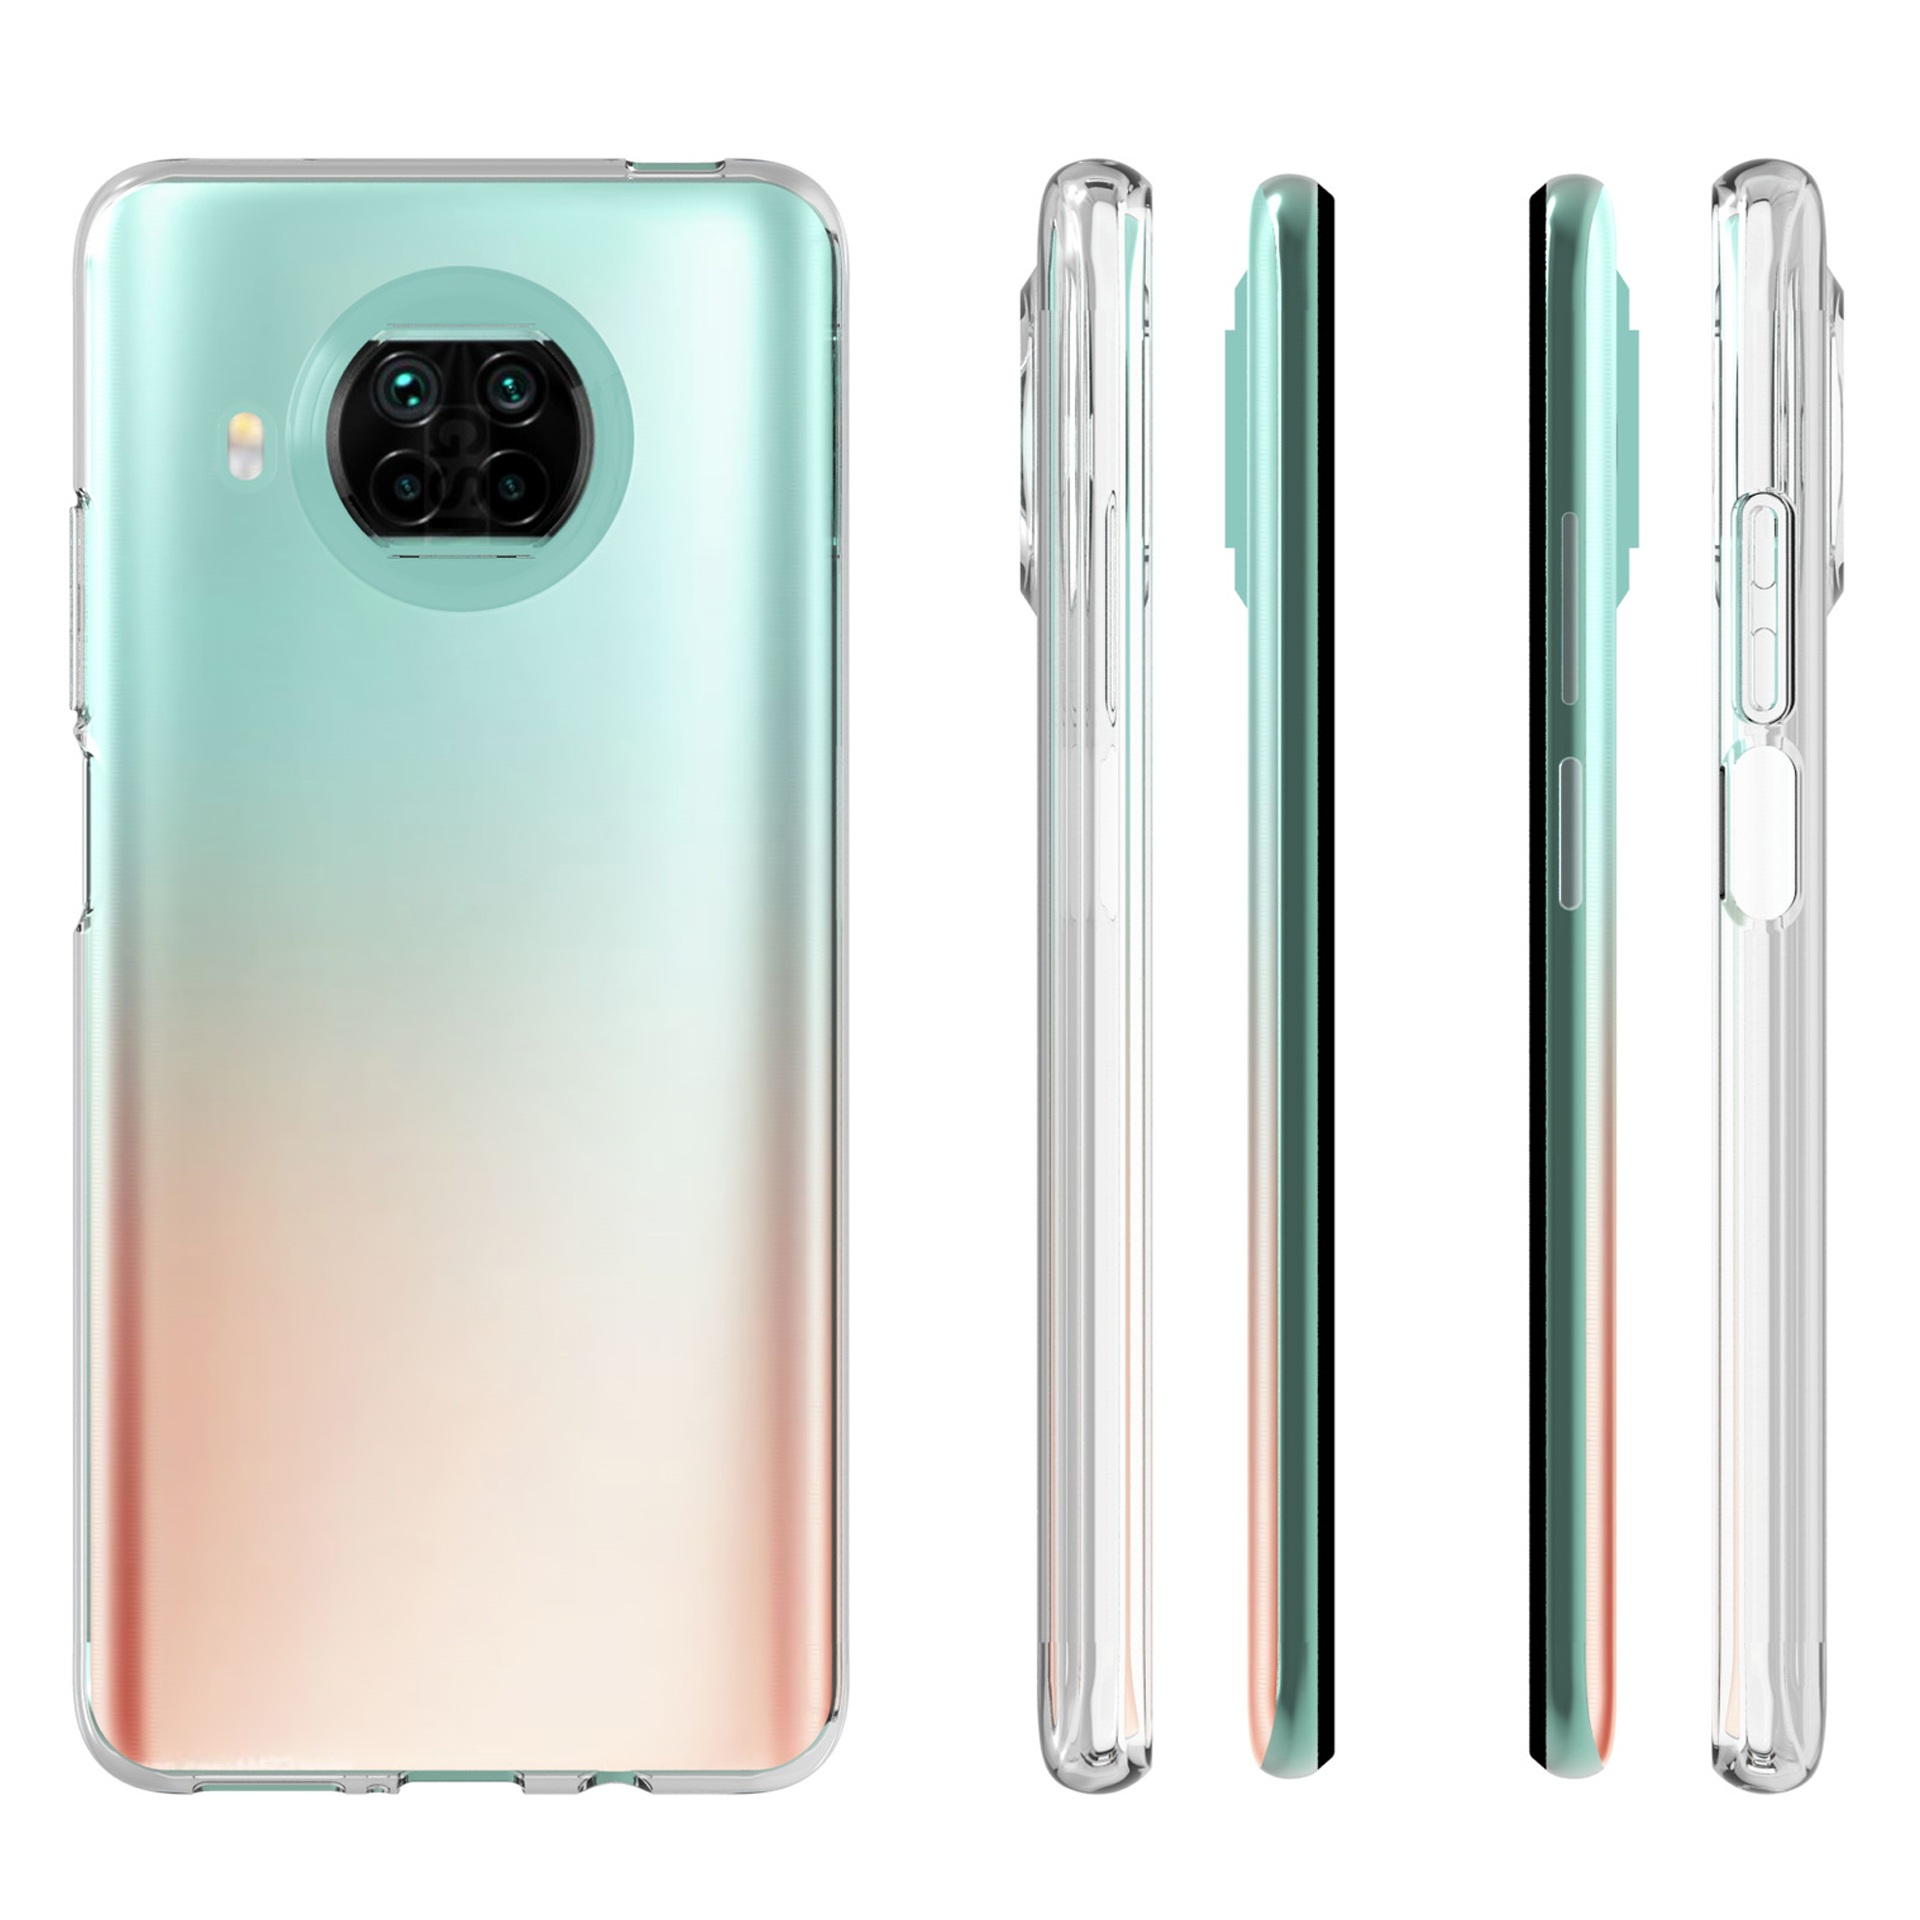 Bakeey-for-Xiaomi-Mi-10T-Lite-5G--Redmi-Note-9-Pro-5G-Case-Crystal-Clear-Transparent-Ultra-Thin-Non--1790619-8